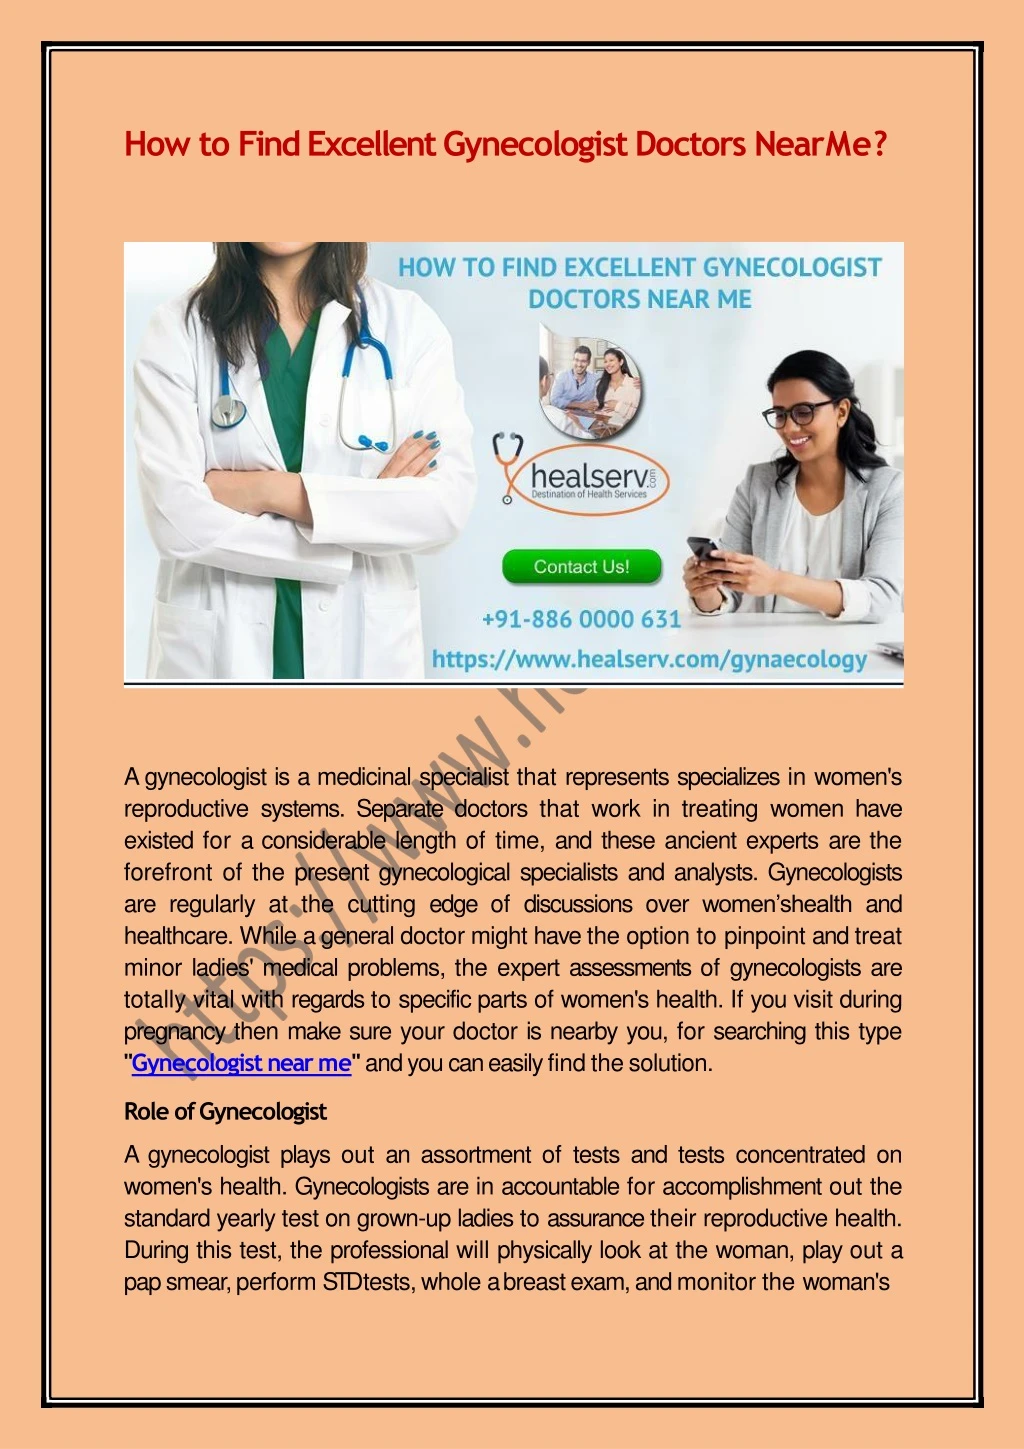 how to find excellent gynecologist doctors near me